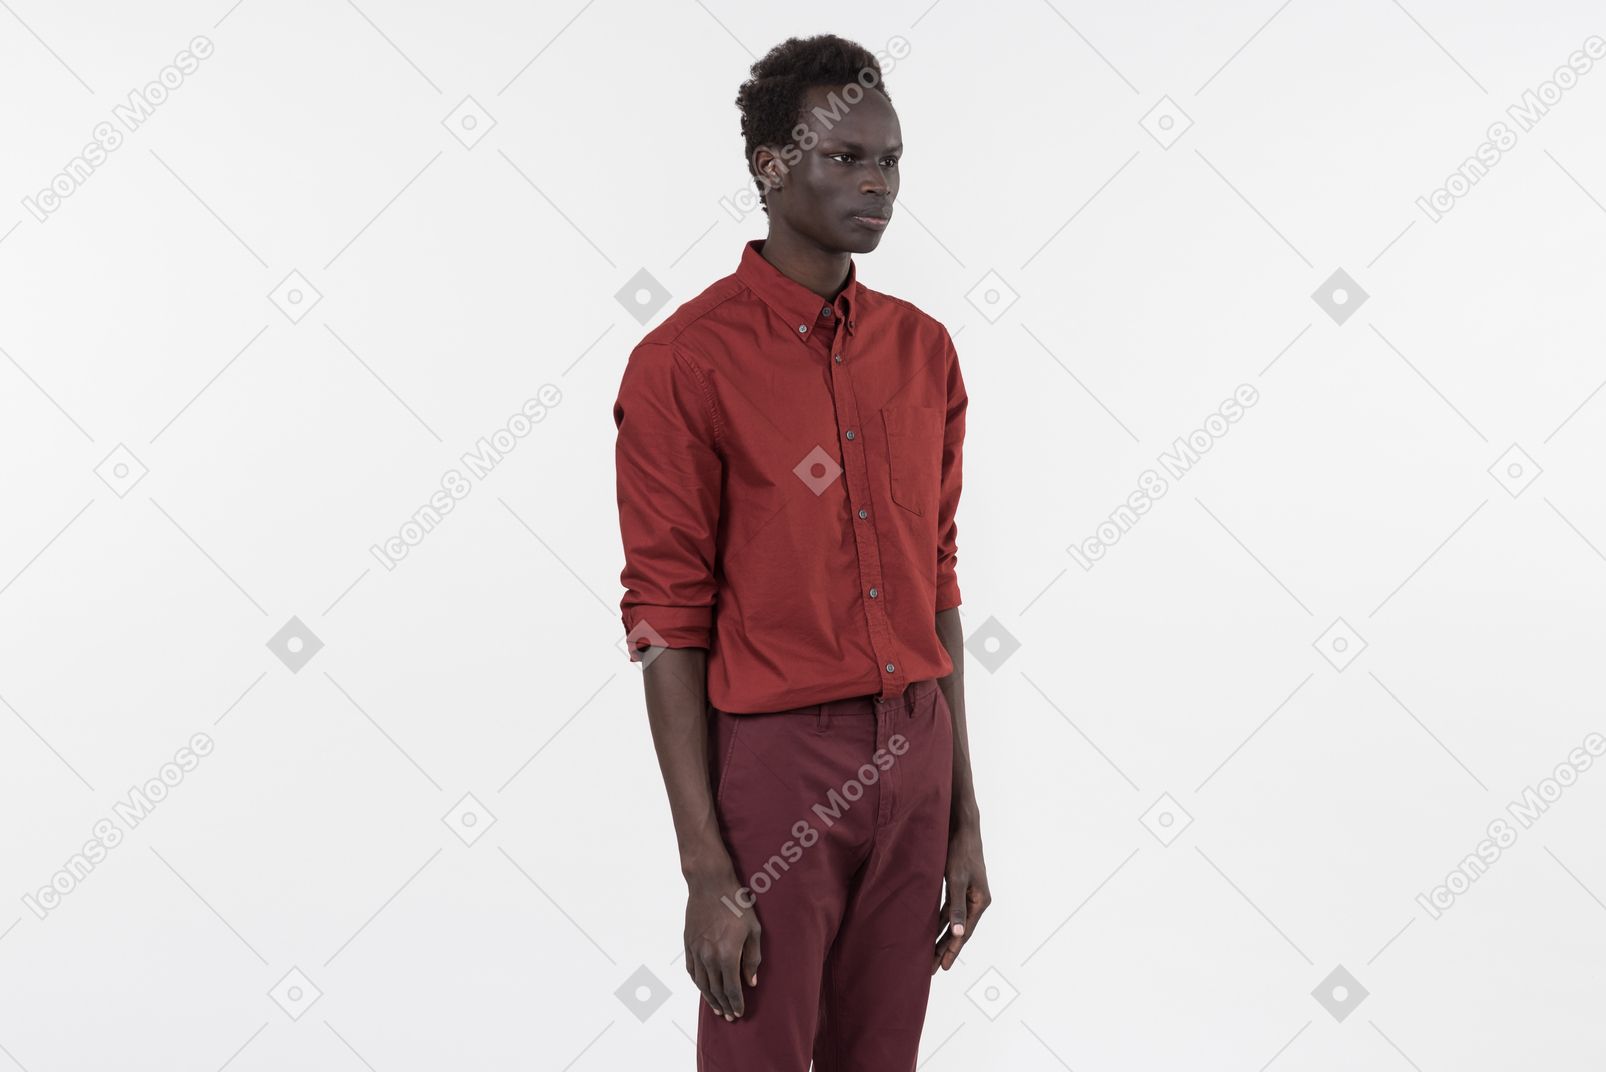 Young black man standing